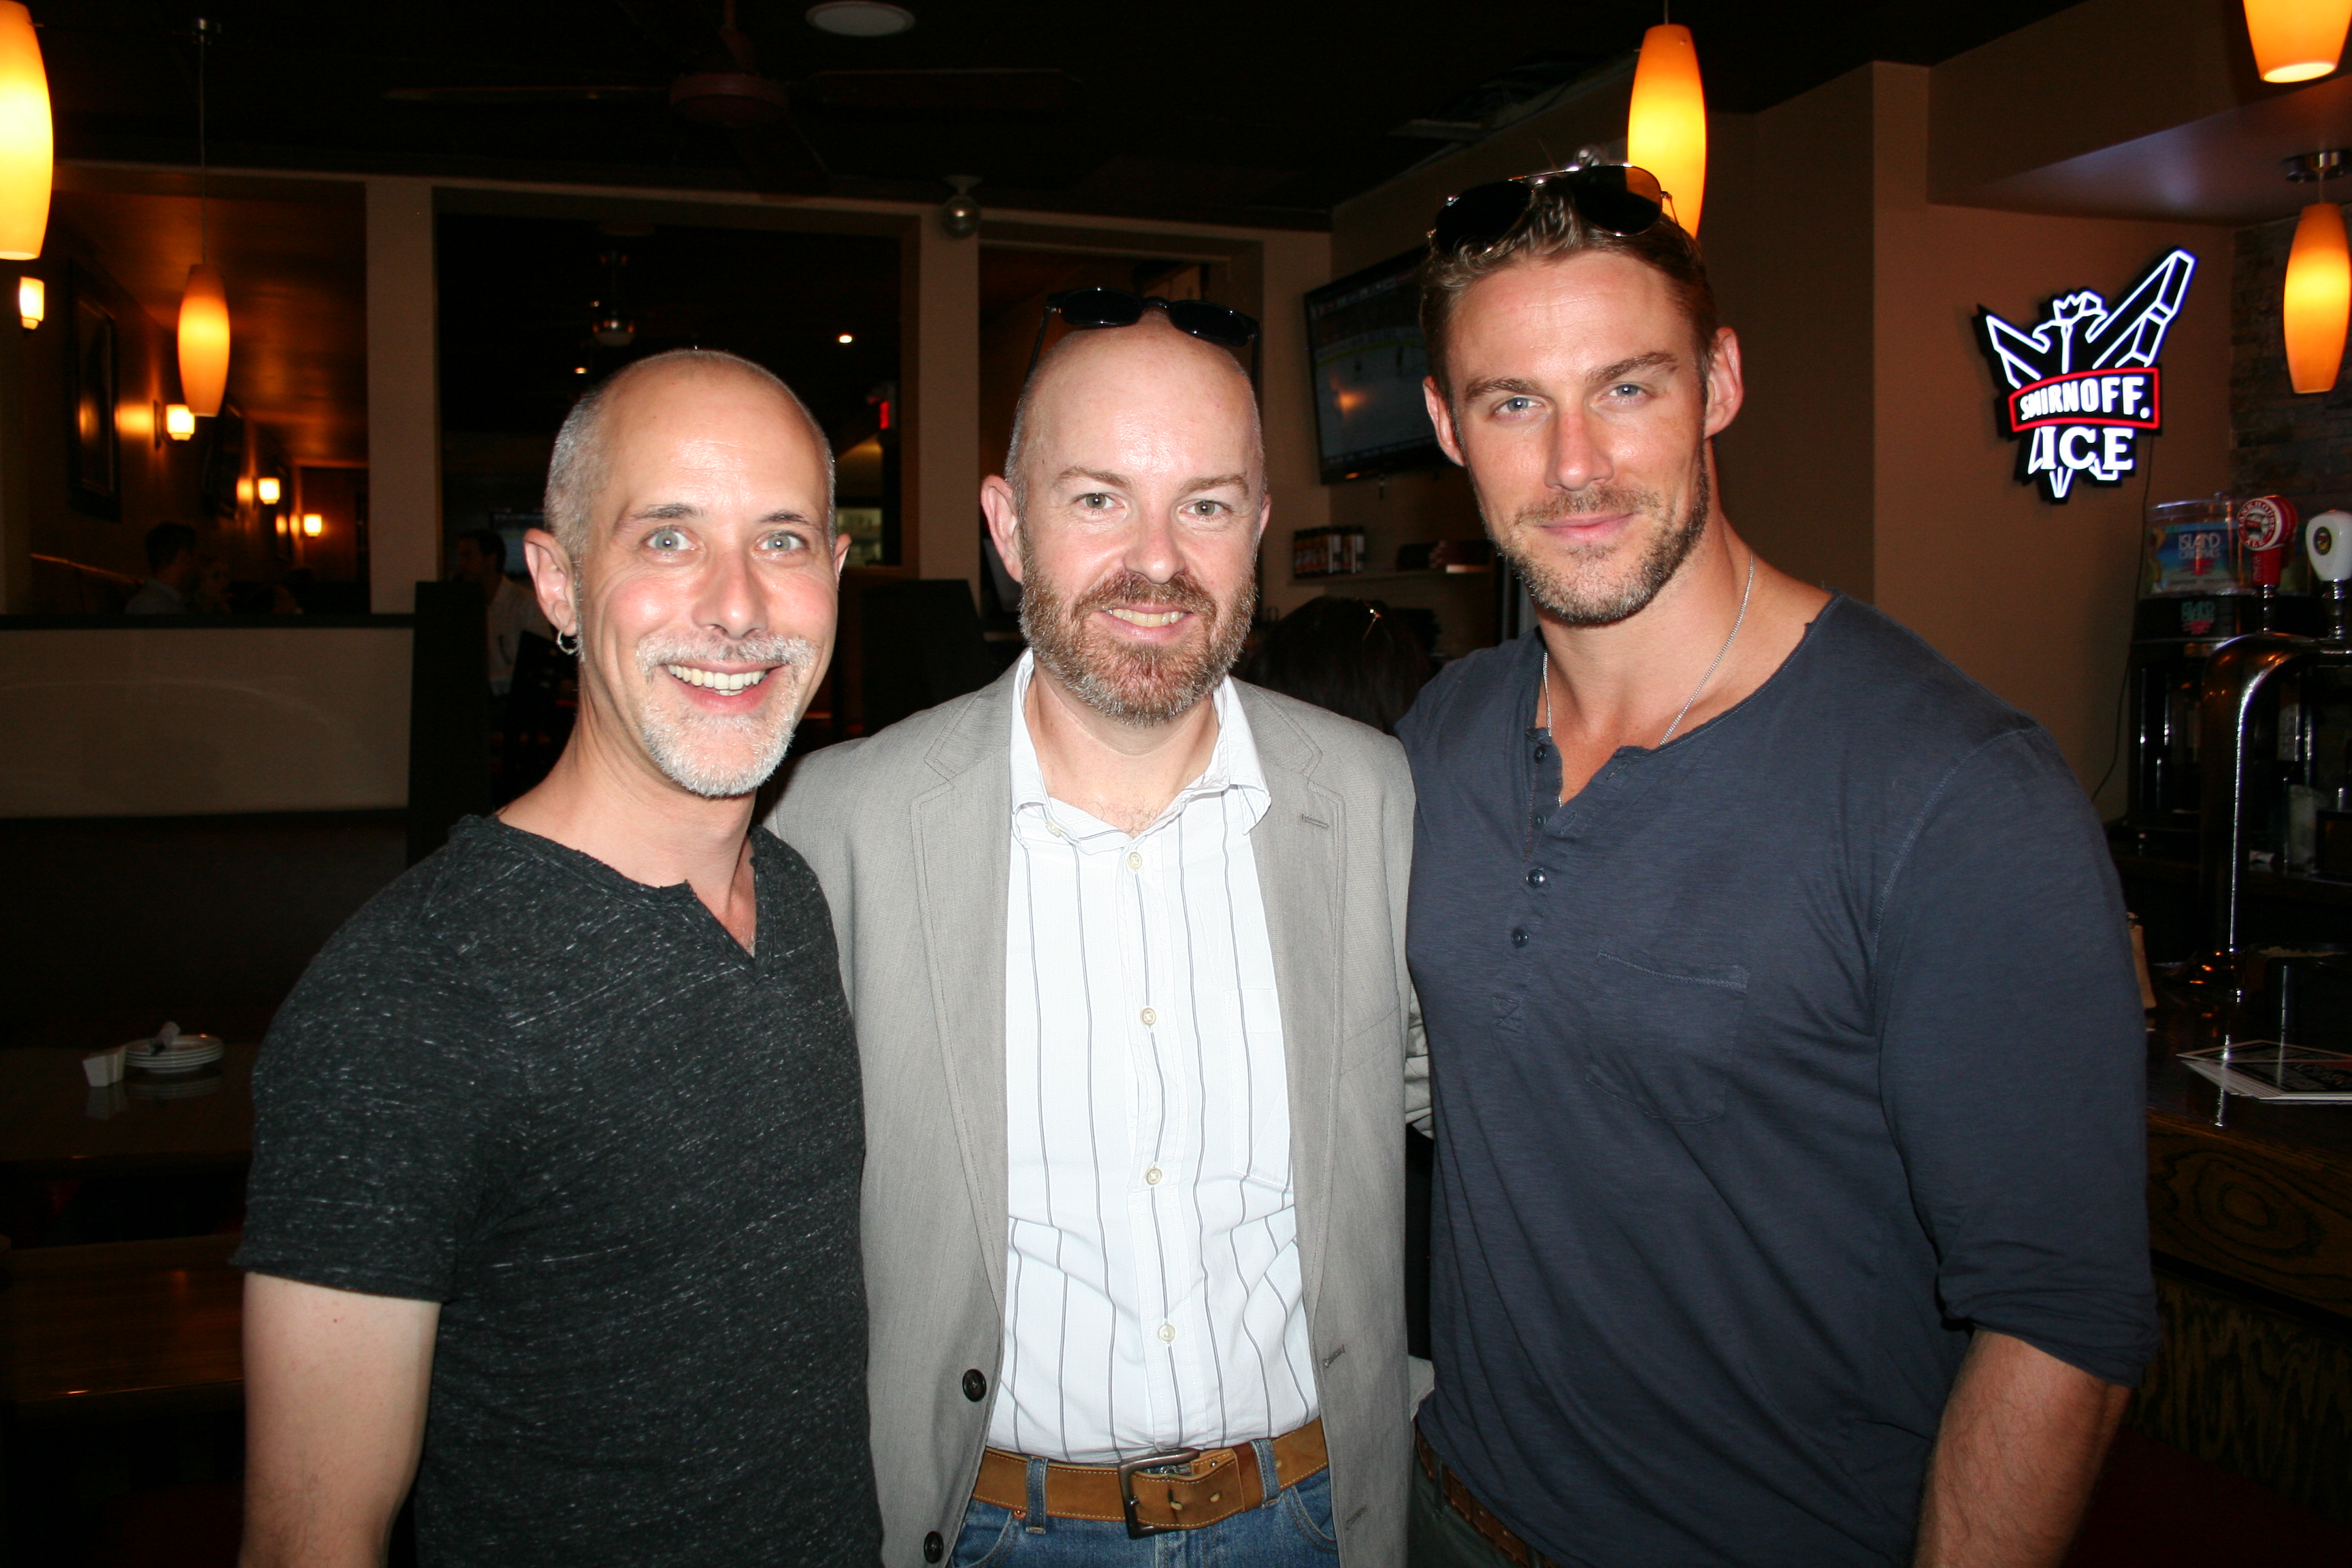 Allan Wylie & Jessie Pavelka with Rob Sequin at The Charon Incident screening